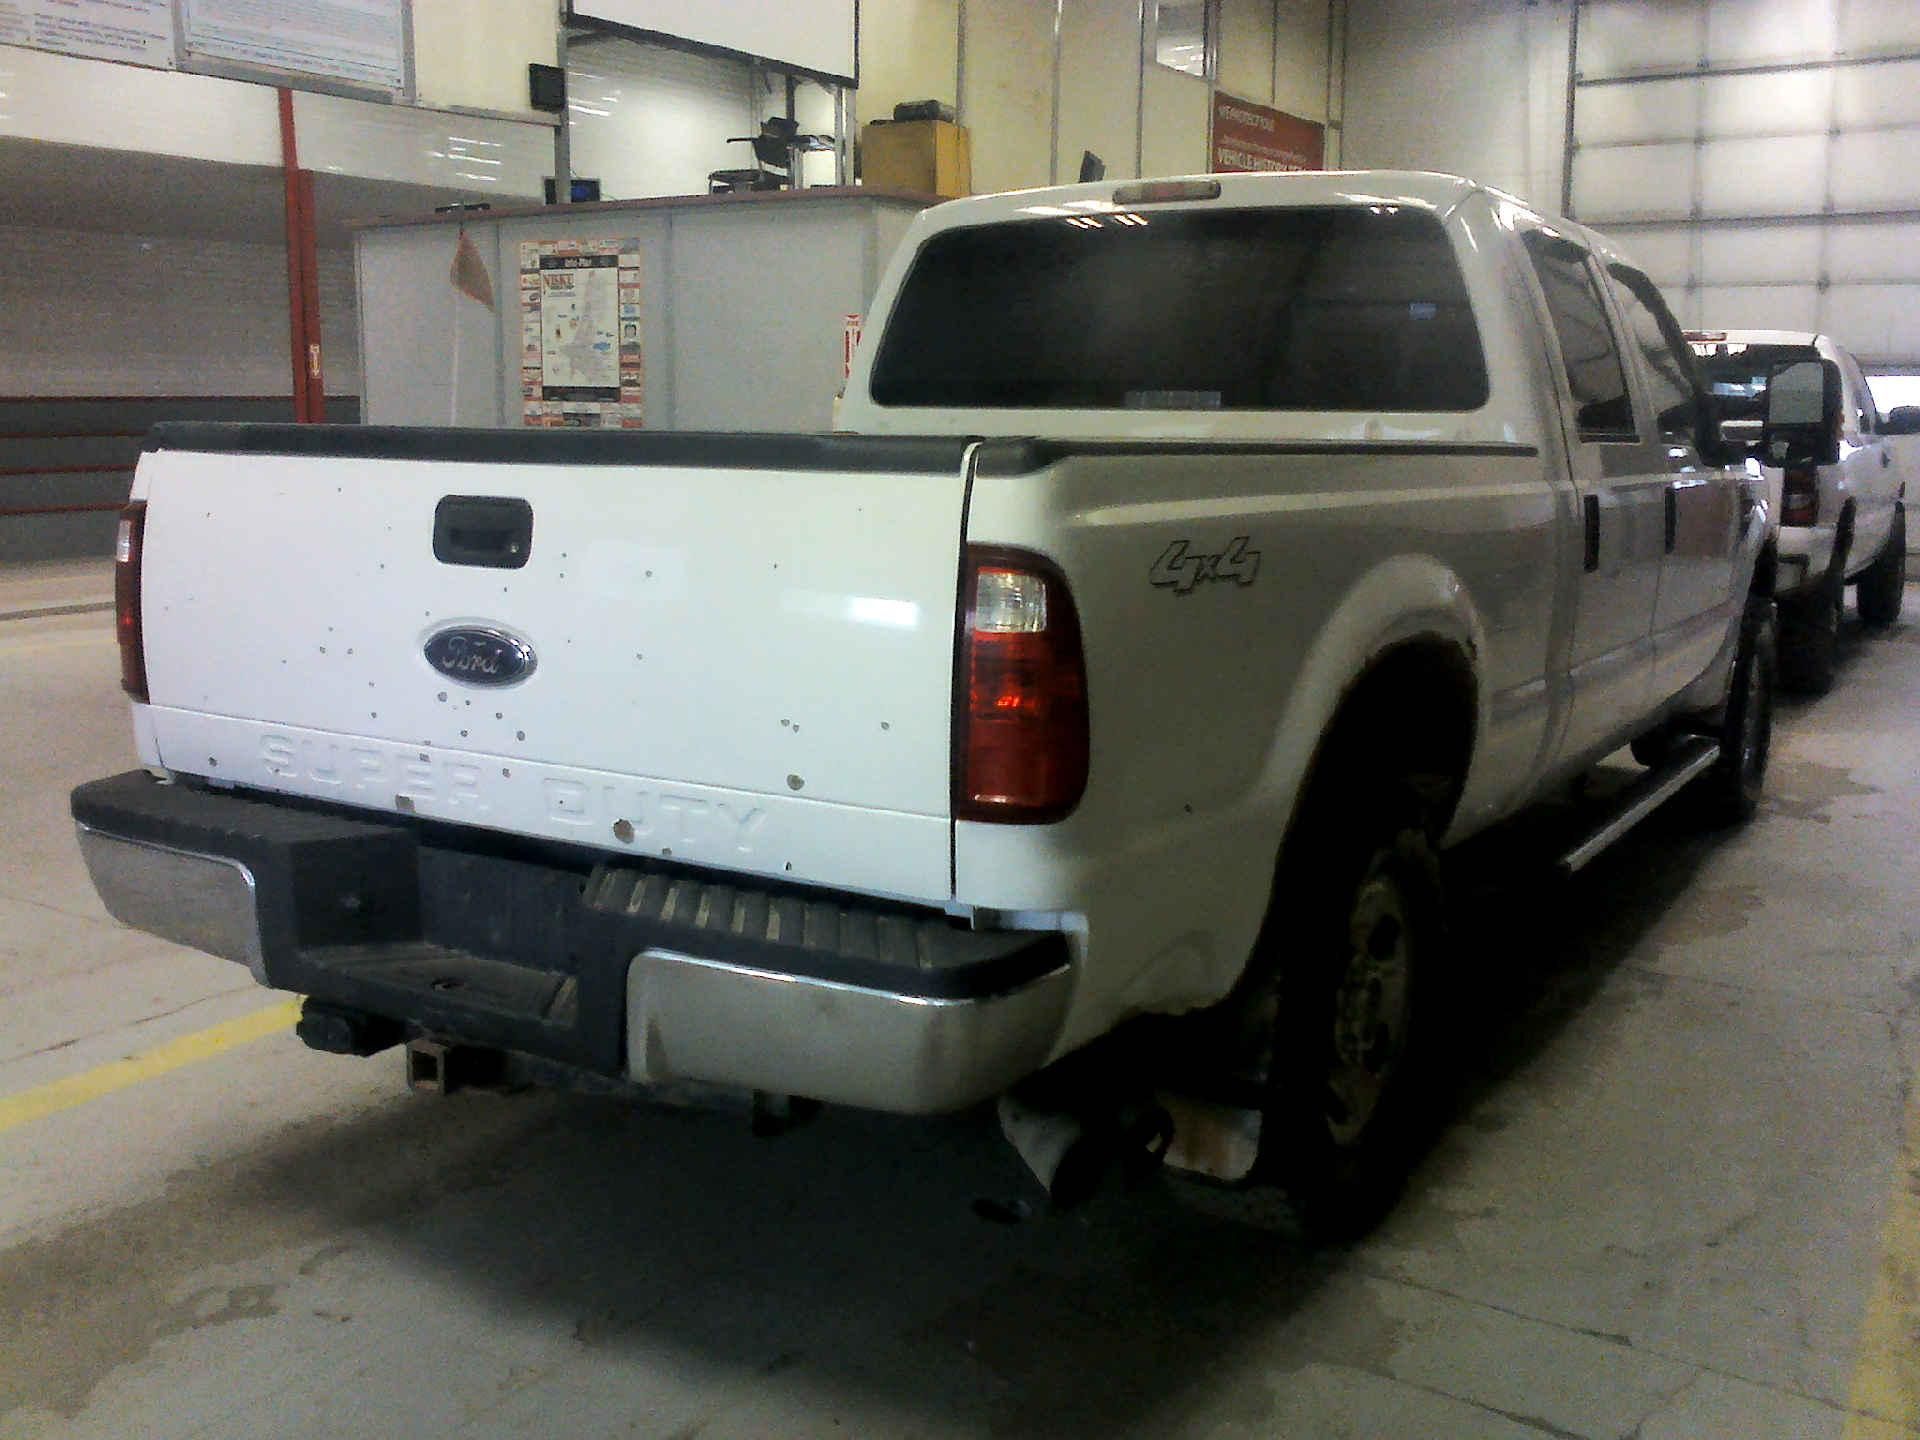 2008 FORD F-350 SD XLT CREW CAB 4WD 6.4L V8 OHV 32V TURBO DIESEL AUTOMATIC SN:1FTWW31R18EE34885 - Image 4 of 9